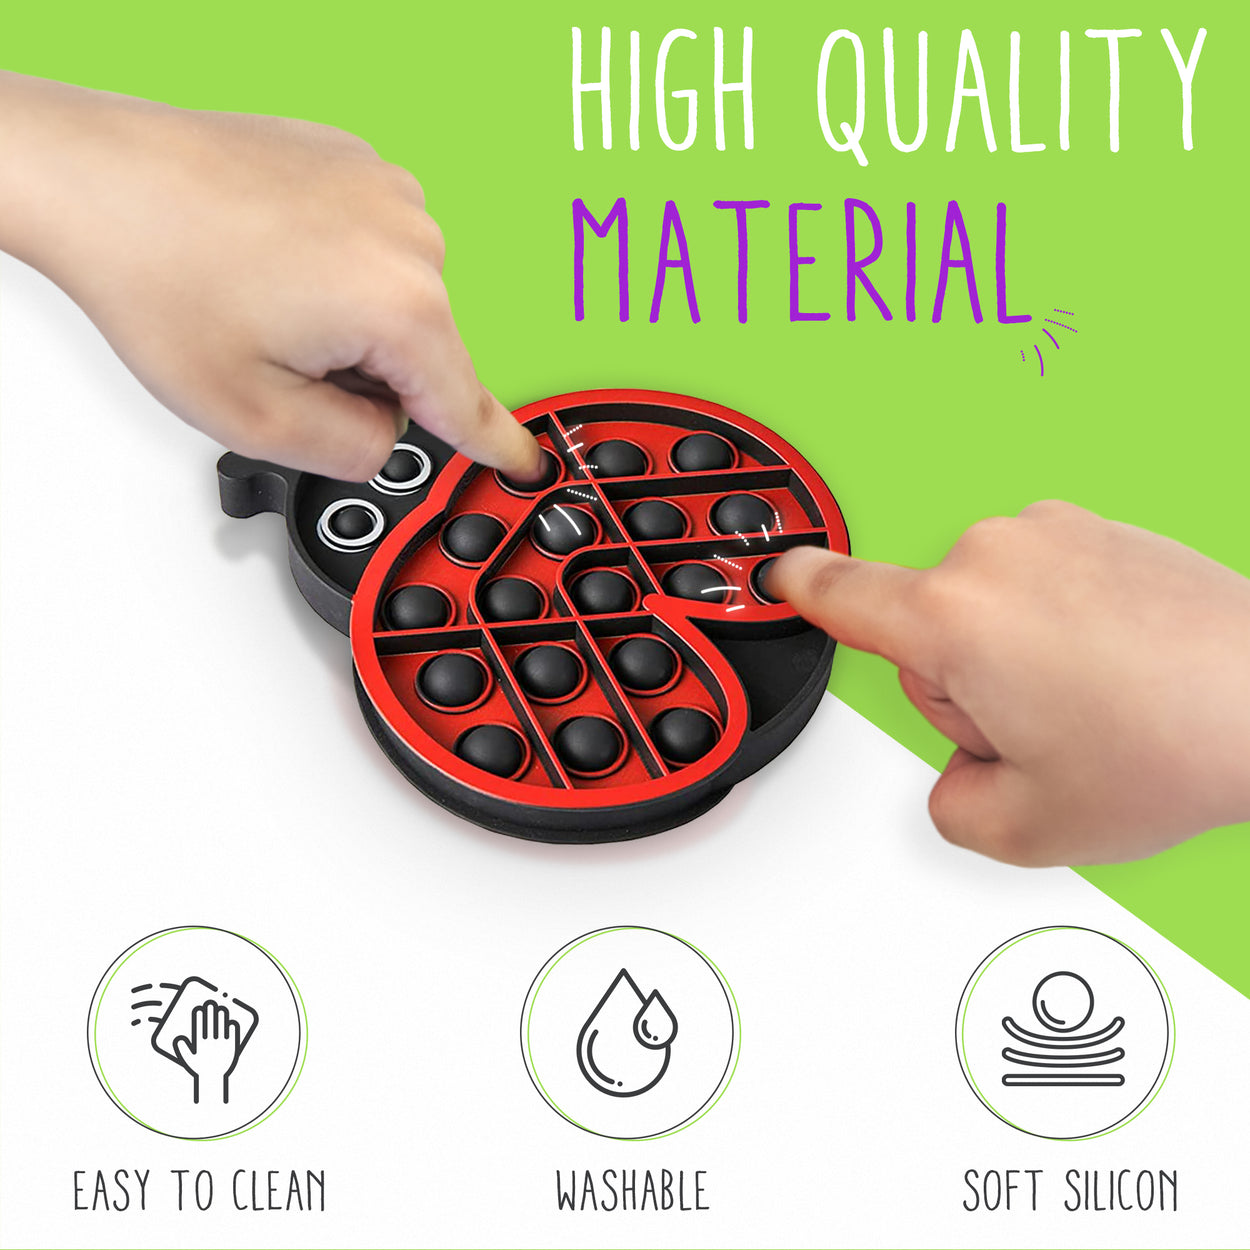 Ladybug toy, easy to clean, washable, soft silicon, High Quality Material